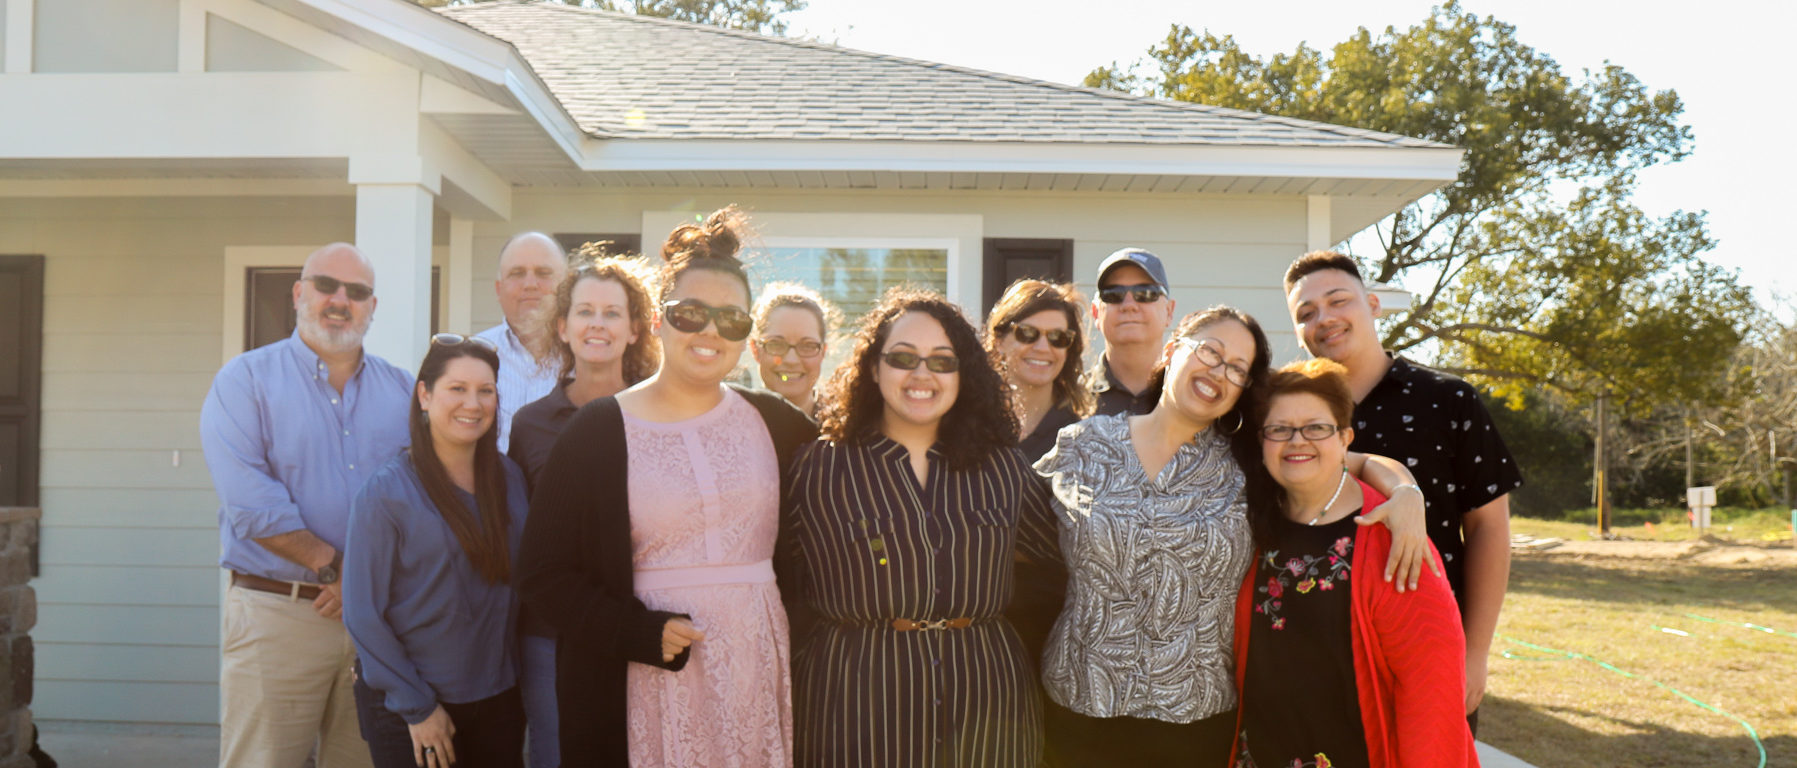 Large group of people with family in front and group of K. Hovnanian team members behind them, all in standing in front of newly completed house